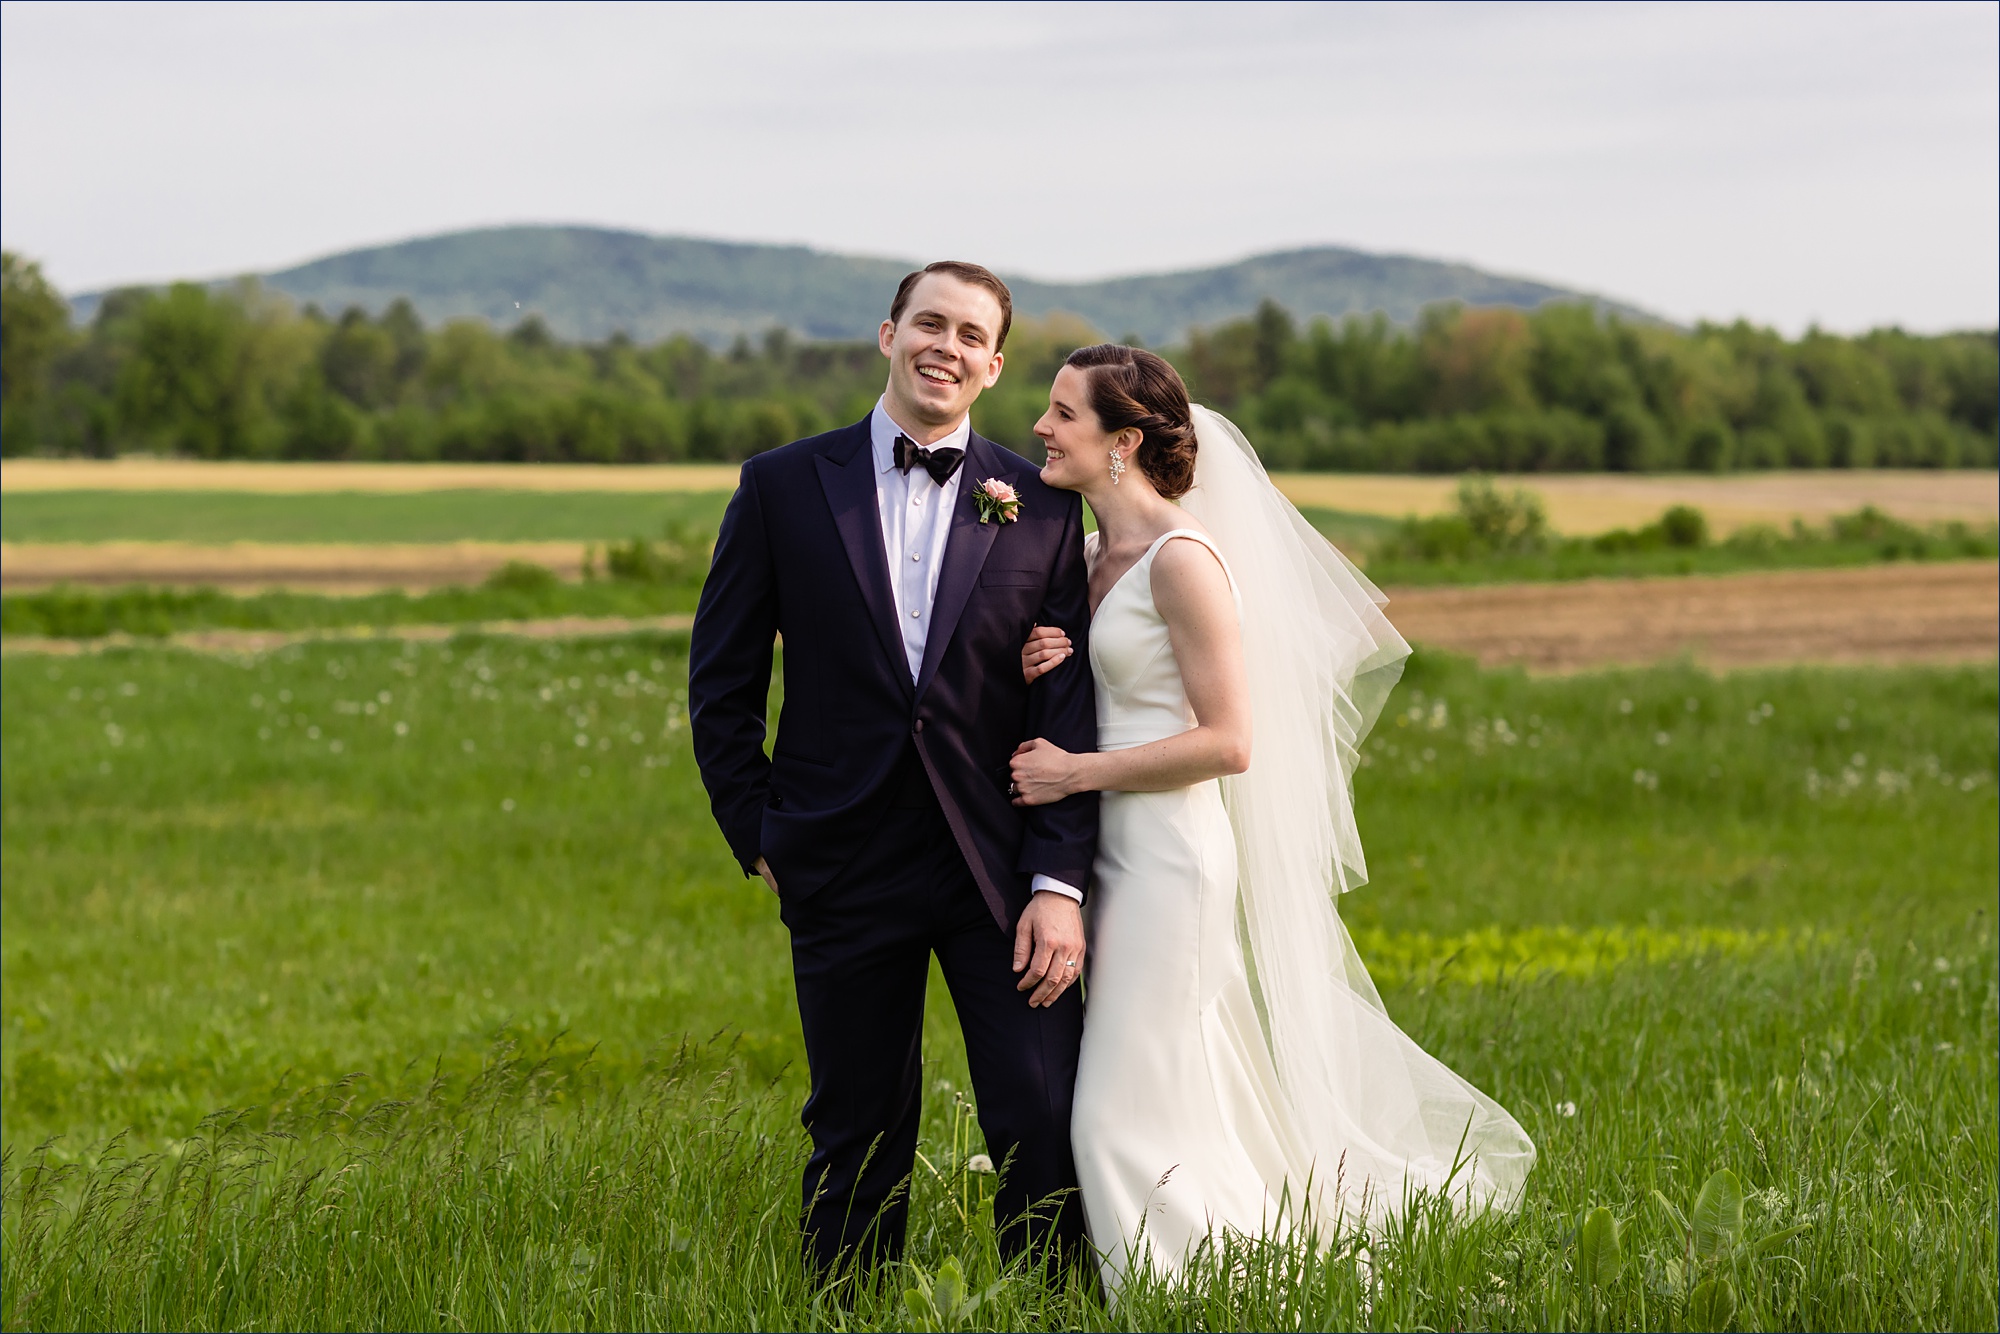 Hardy Farm wedding the bride and groom laugh together out in front of the White Mountains